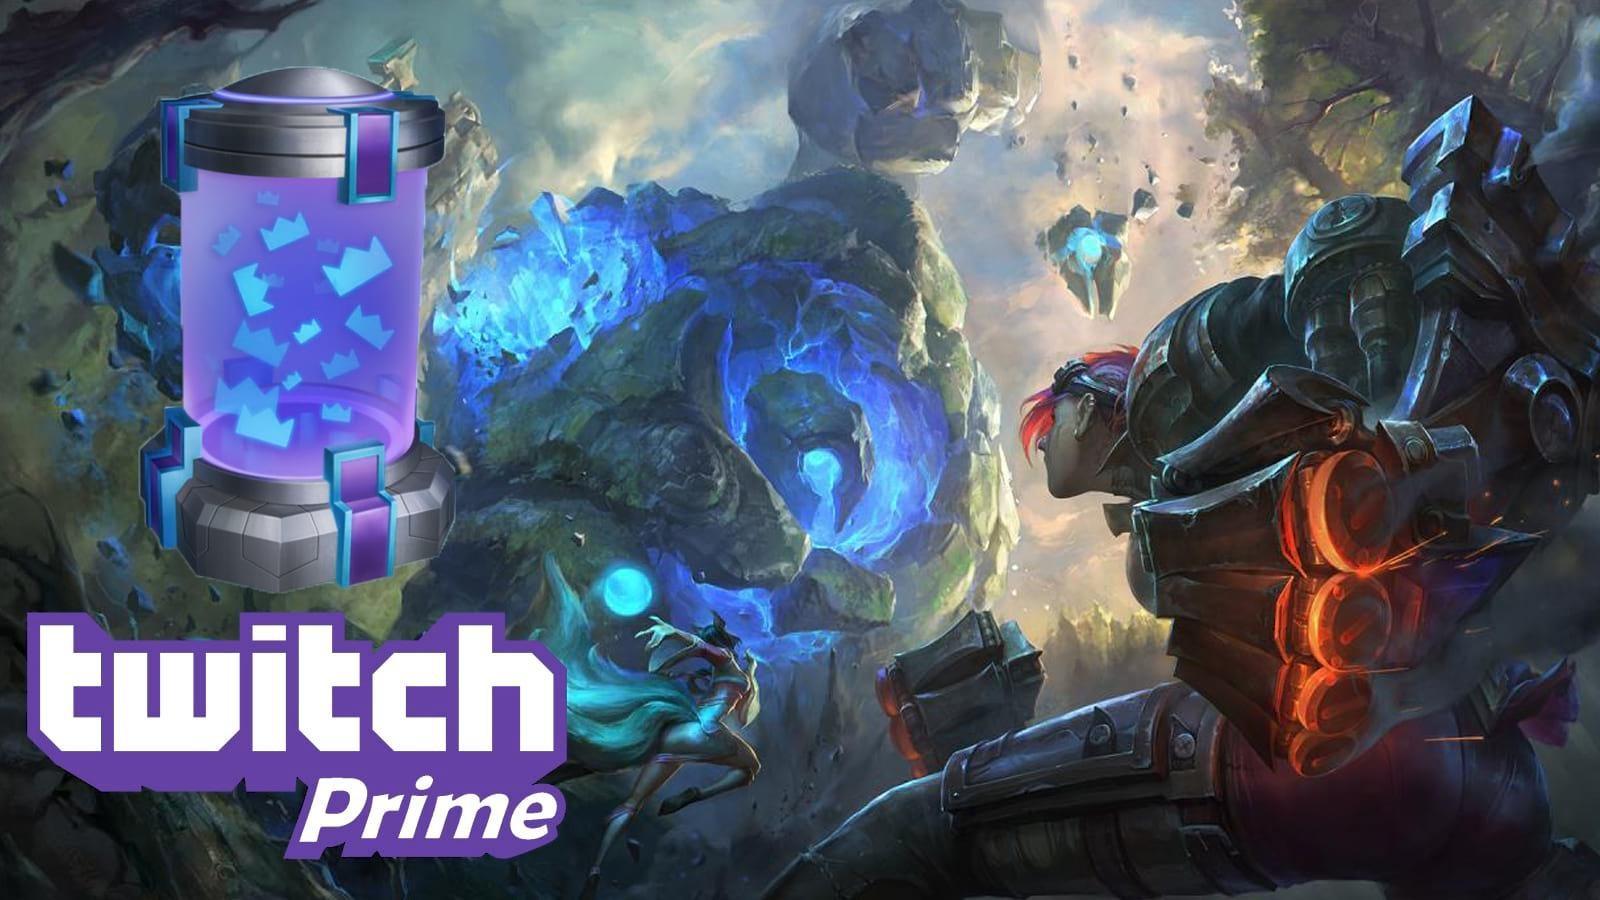 New Twitch Prime offer includes four months of League of Legends